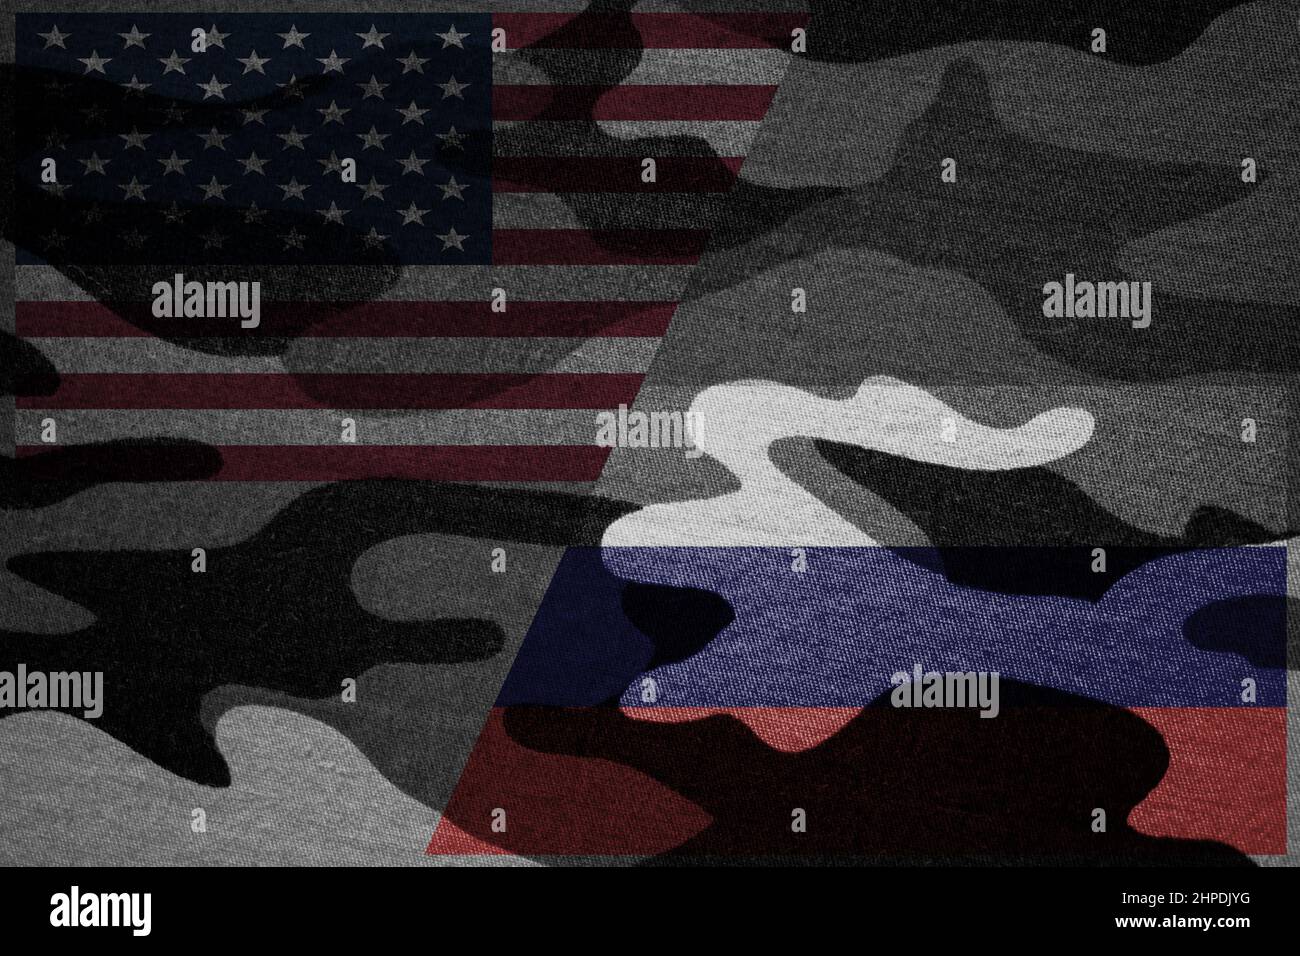 American flag opposite Russian flag on military camouflage background. War between United States of America and Russia concept Stock Photo